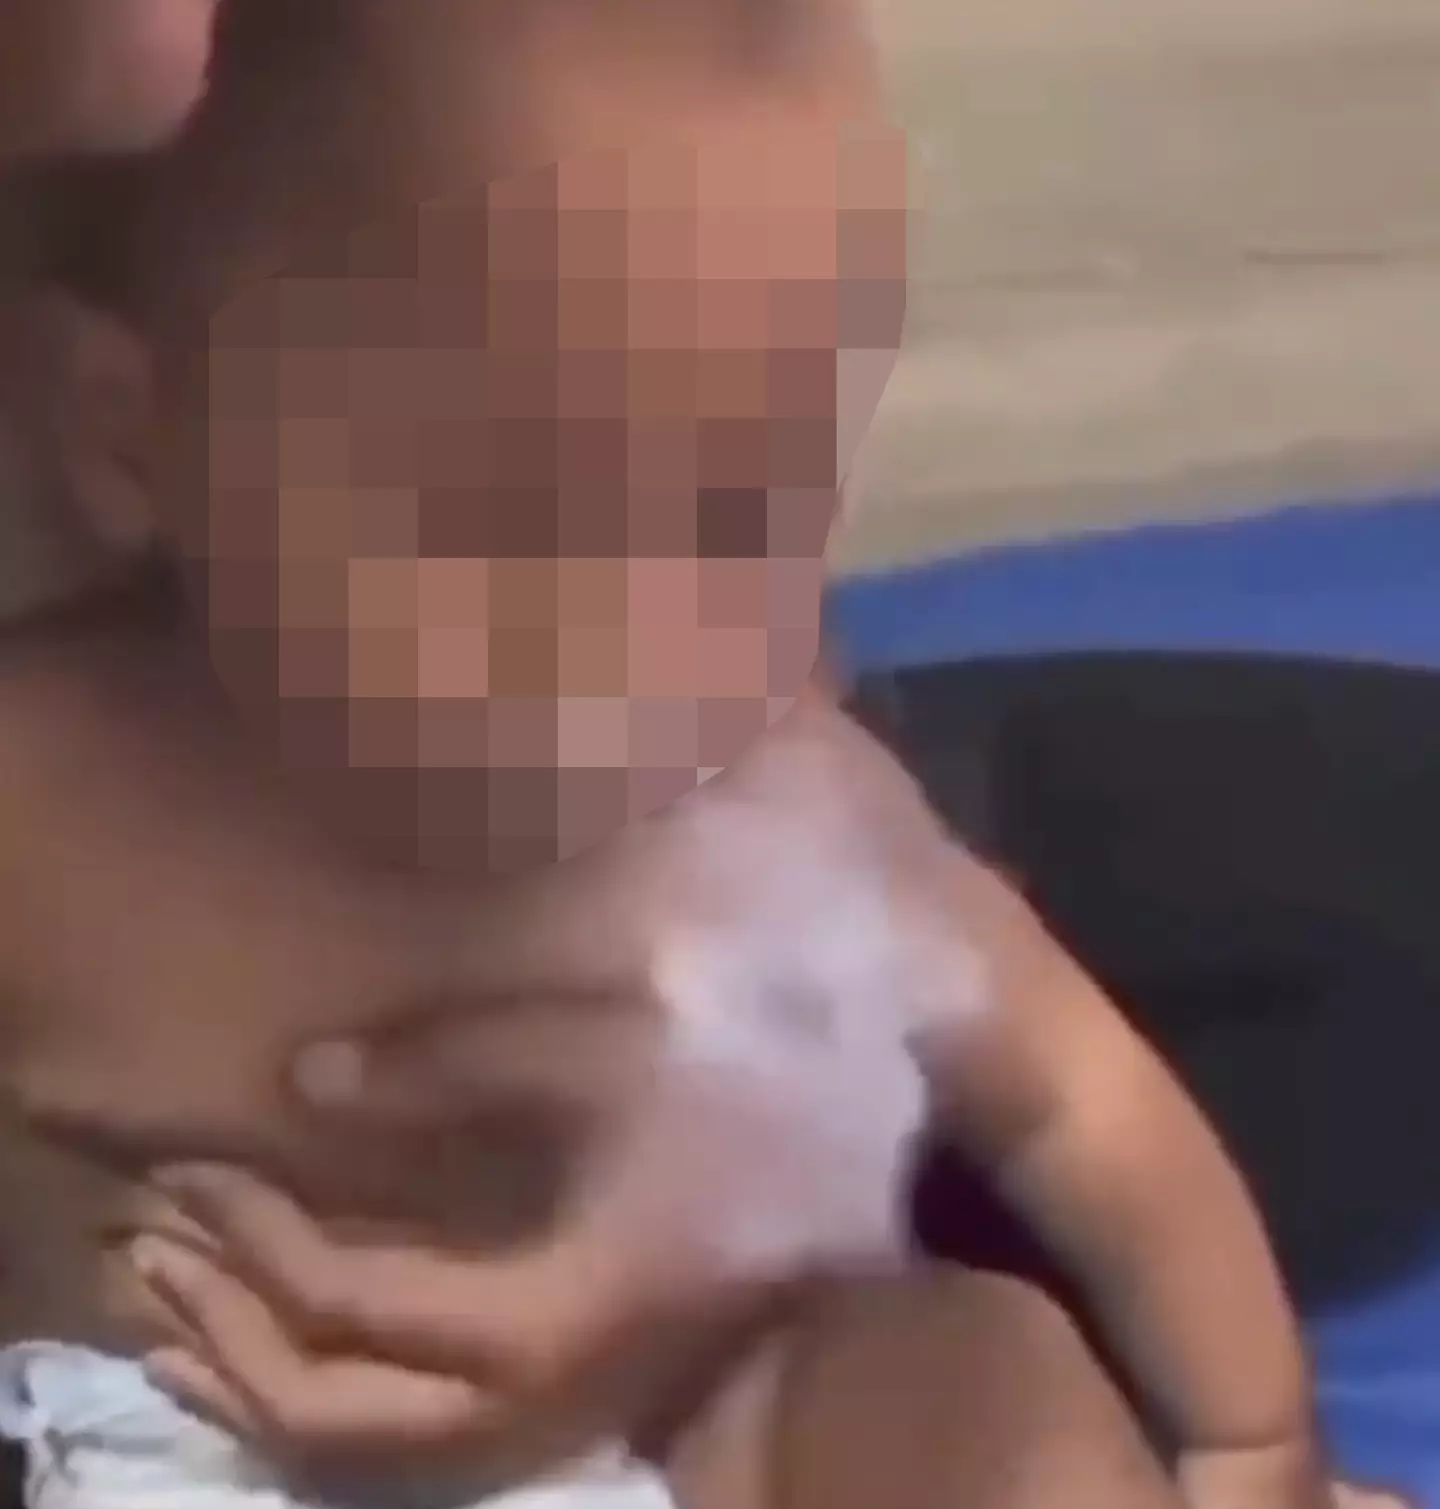 The baby can be seen coughing and spluttering after inhaling from the vape.